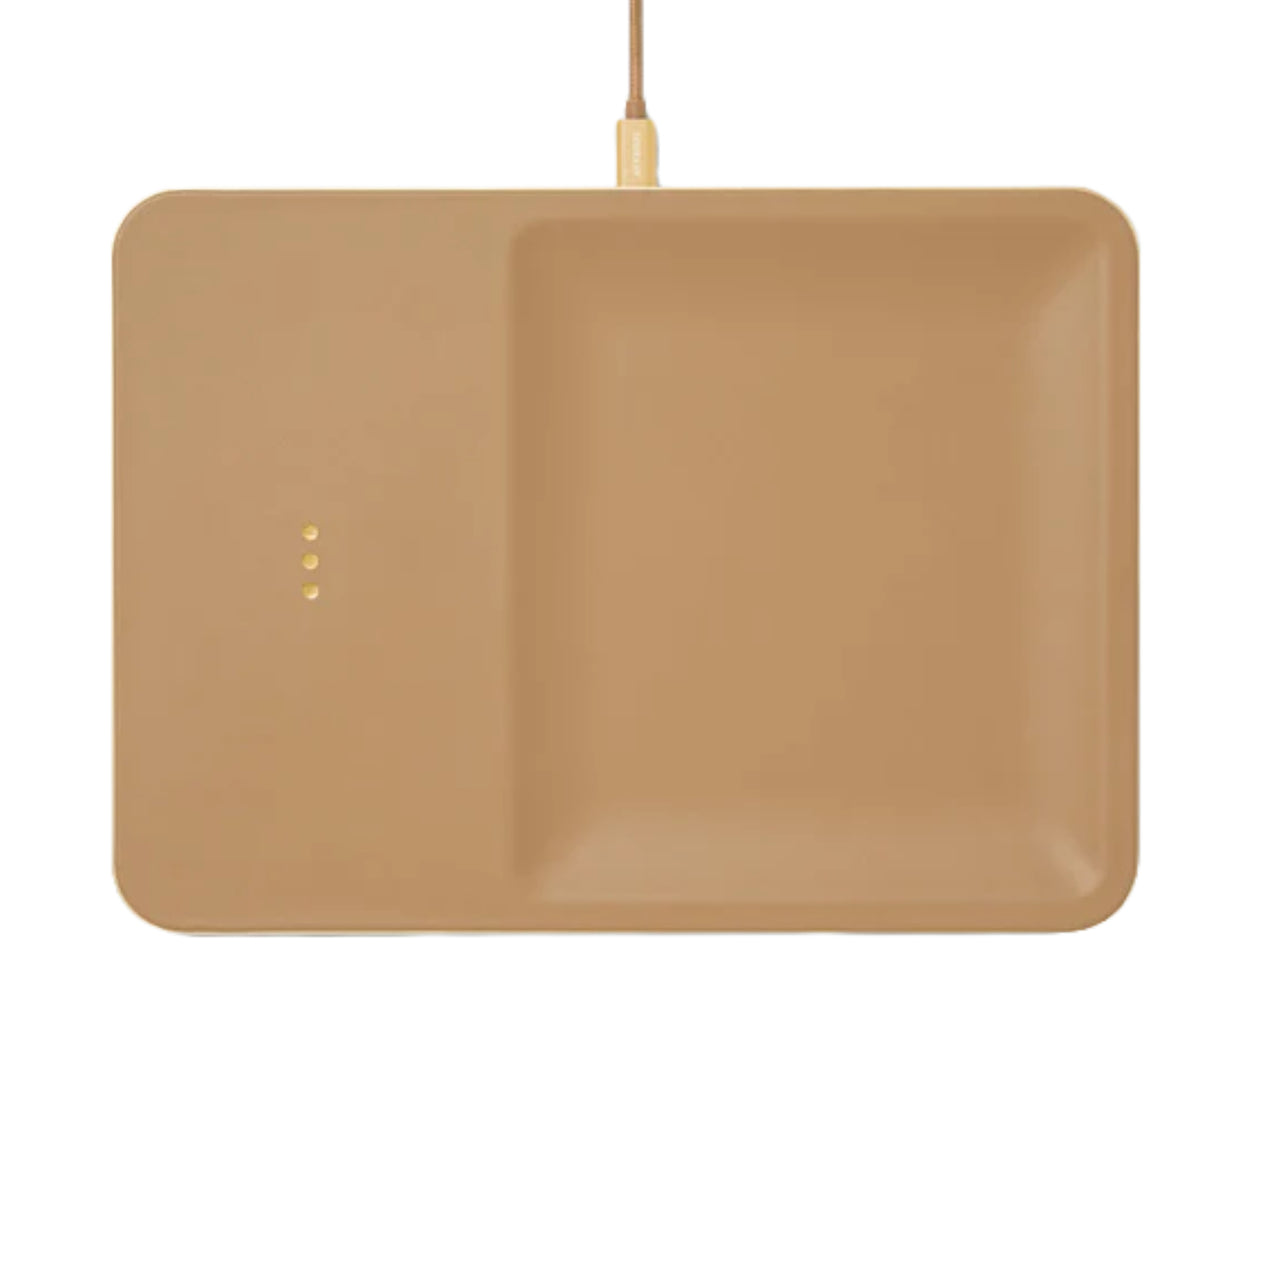 Catch 3 | Cortado Leather Wireless Charger with Valet Tray